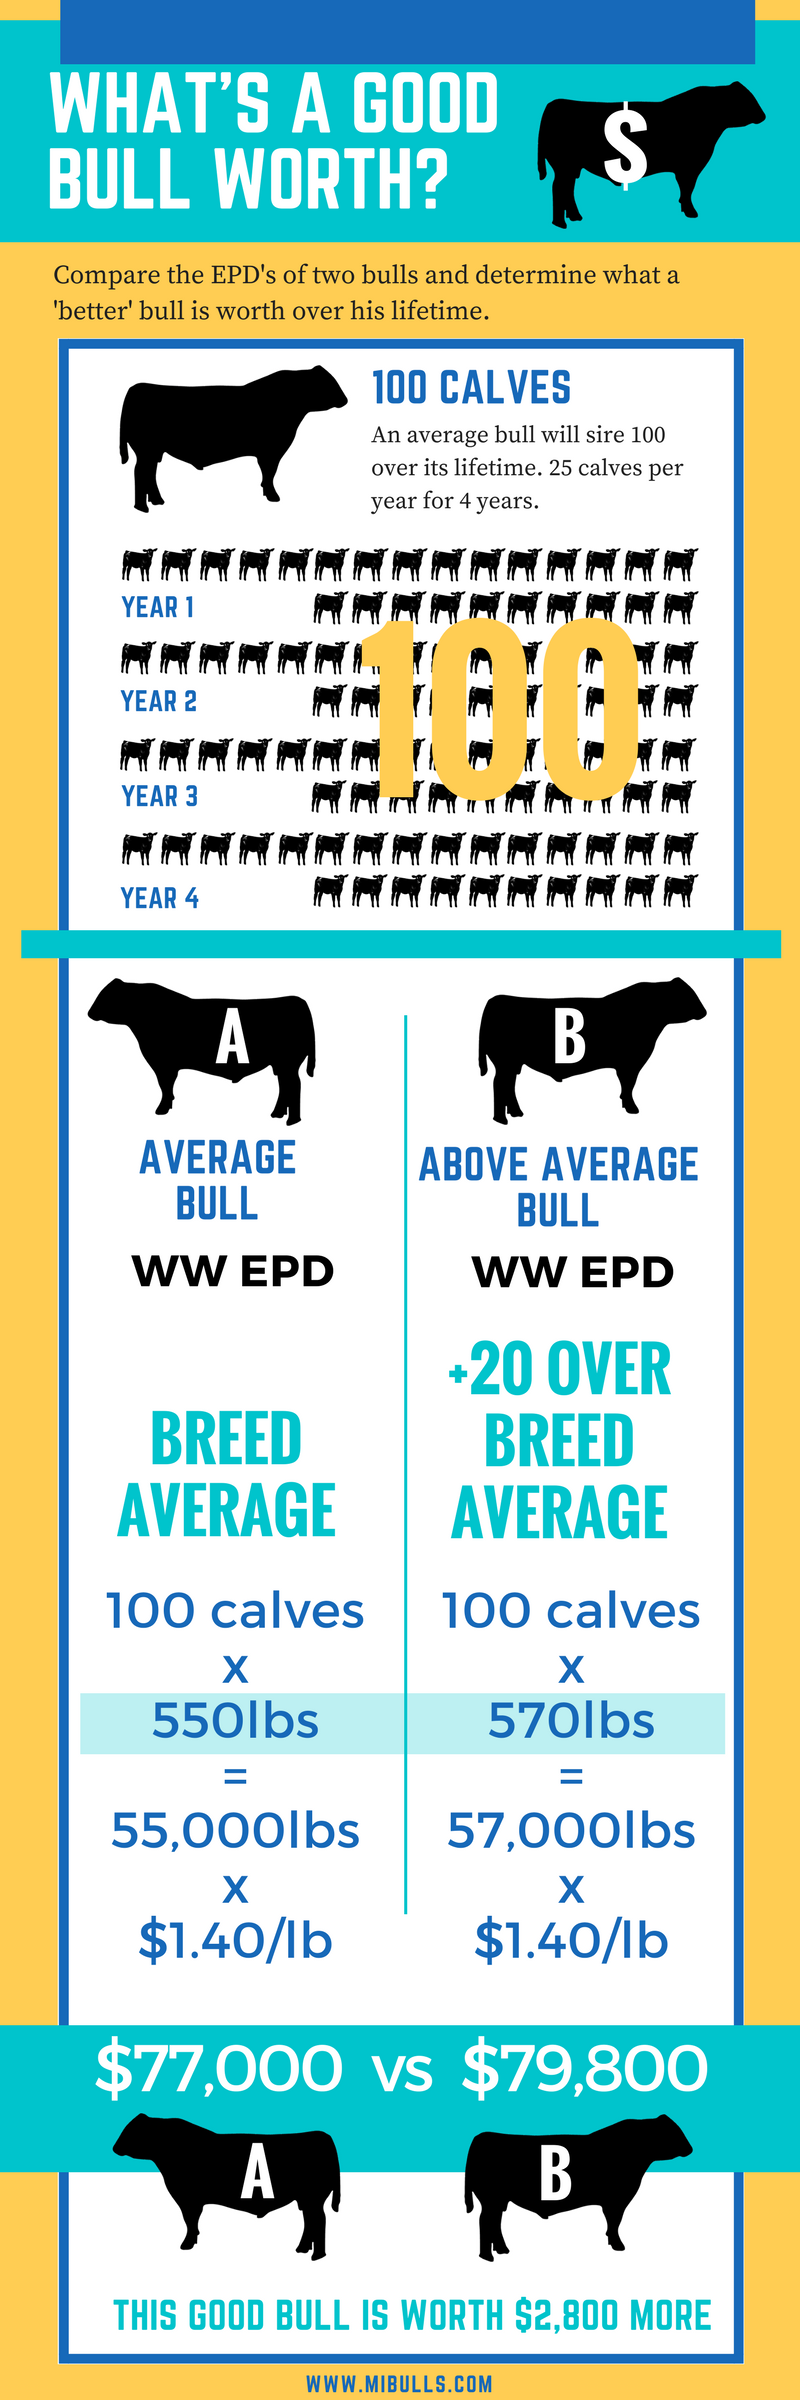 Infographic - What is a good bull worth? (CE)